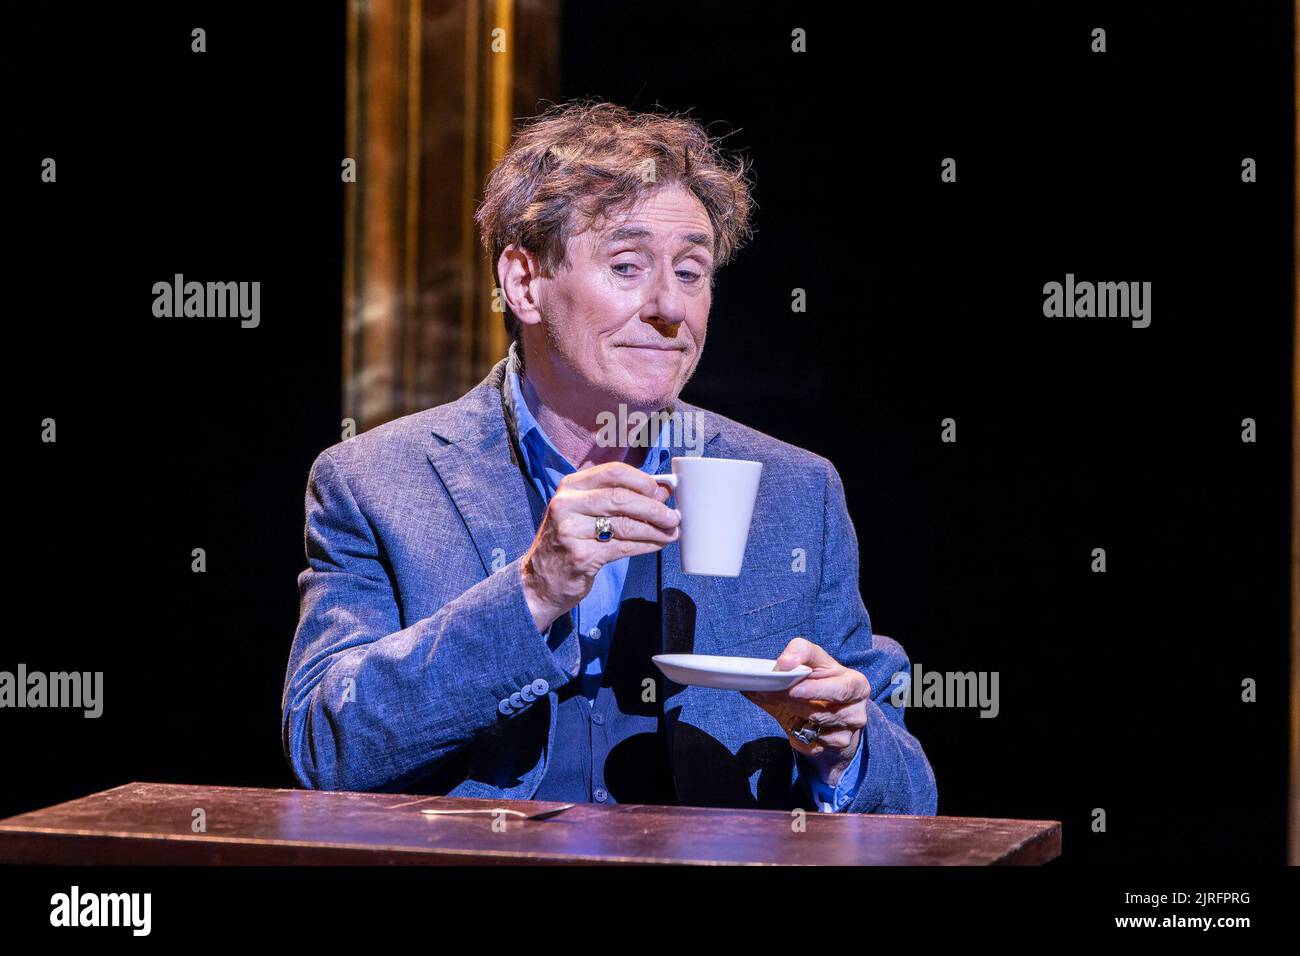 Edinburgh, United Kingdom. 24 August, 2022 Pictured: Adapted from his best-selling 2020 memoir of the same name, Walking with Ghosts follows Gabriel Byrne from his childhood in Ireland to his film career in Hollywood. Credit: Rich Dyson/Alamy Live News Stock Photo